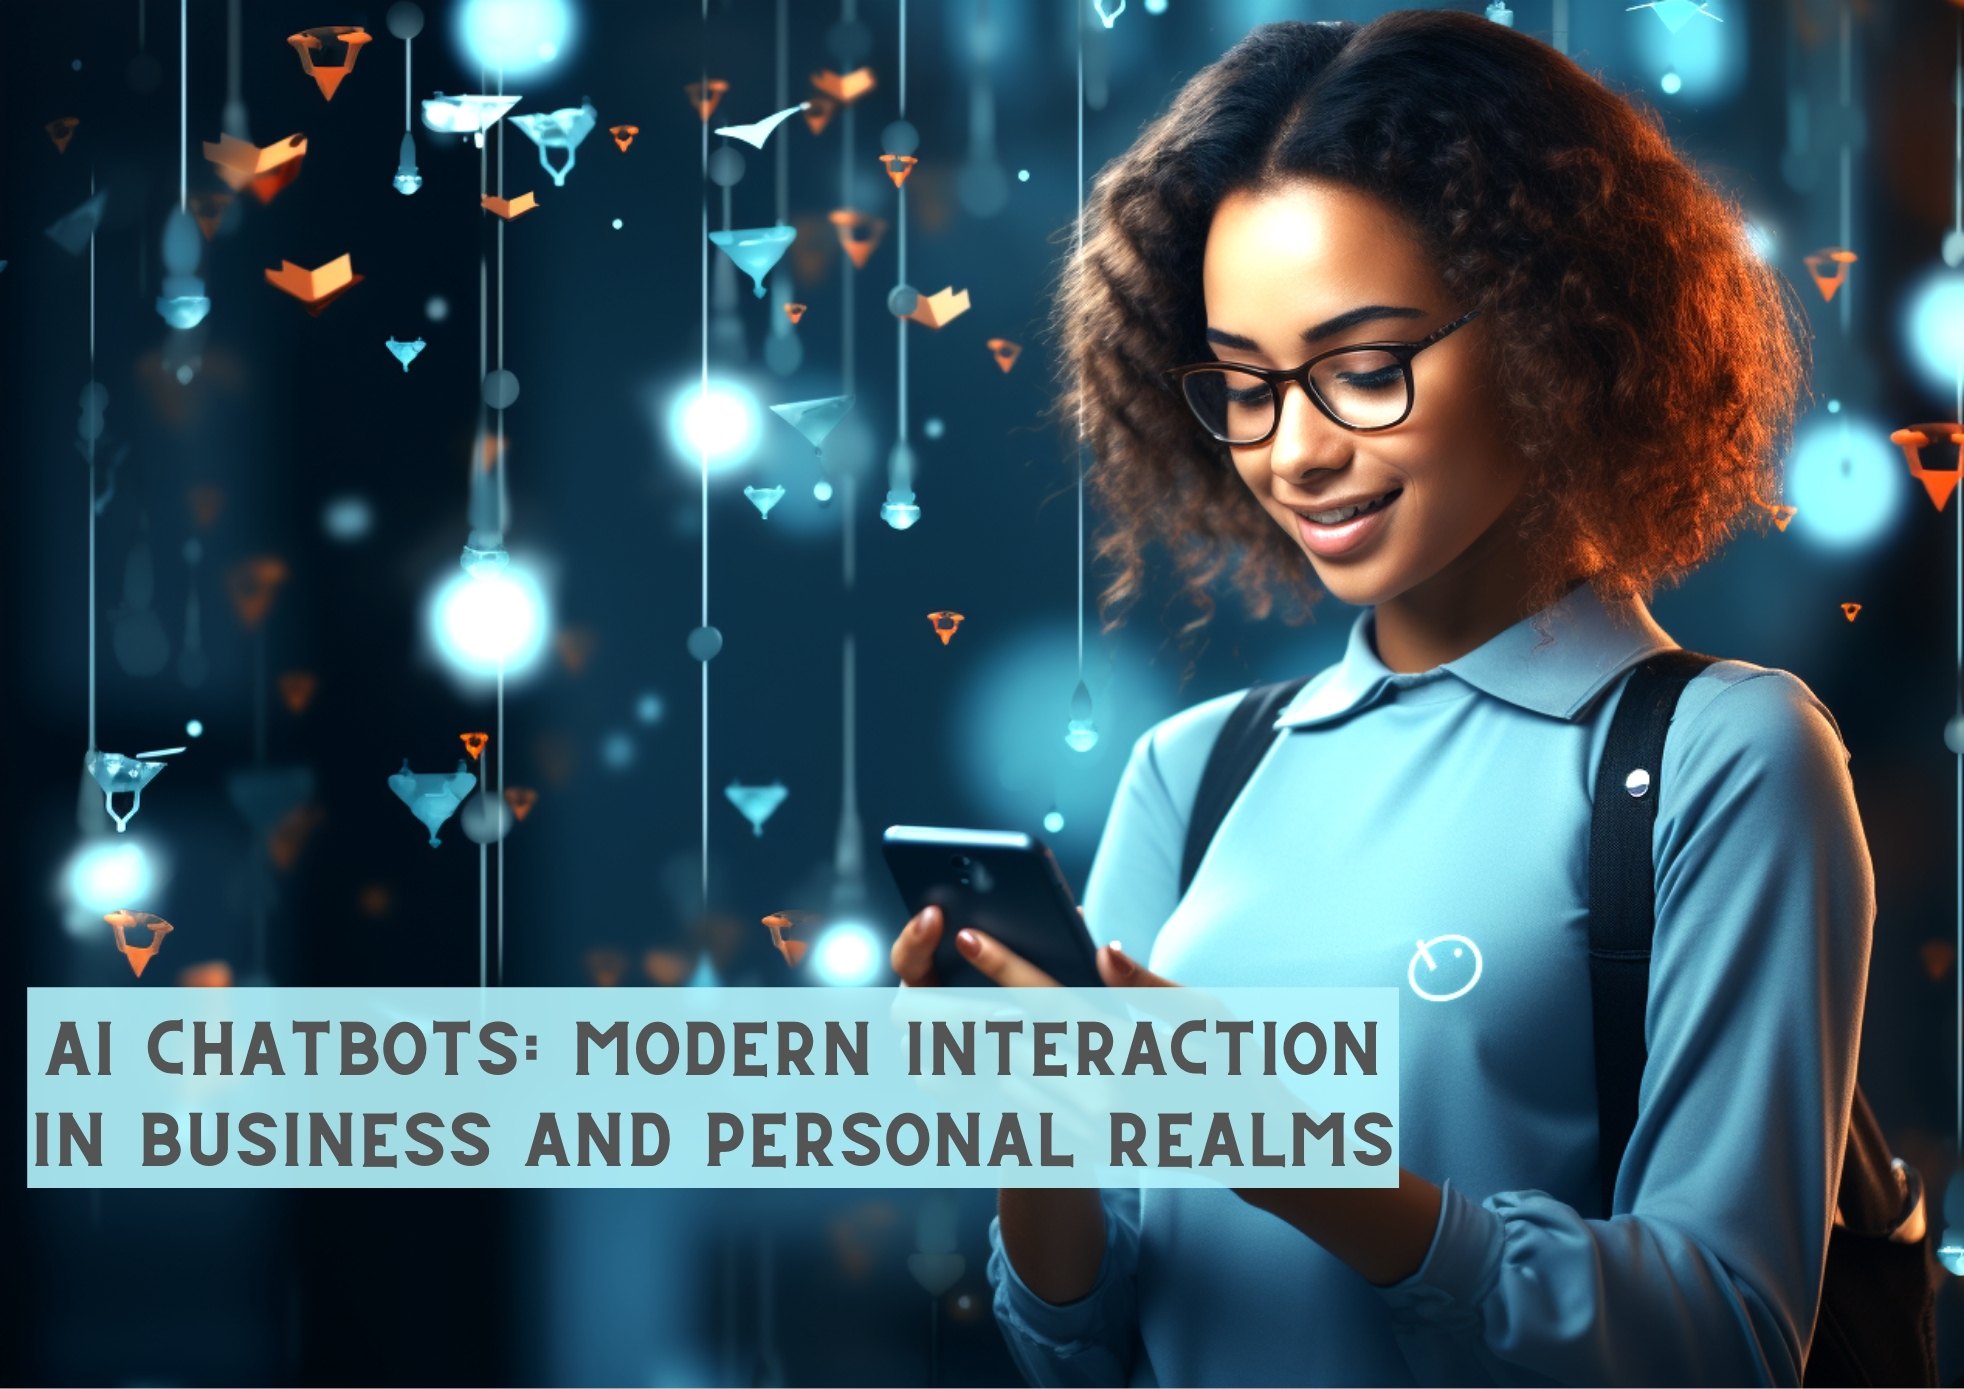 AI Chatbots: Modern Interaction in Business and Personal Realms